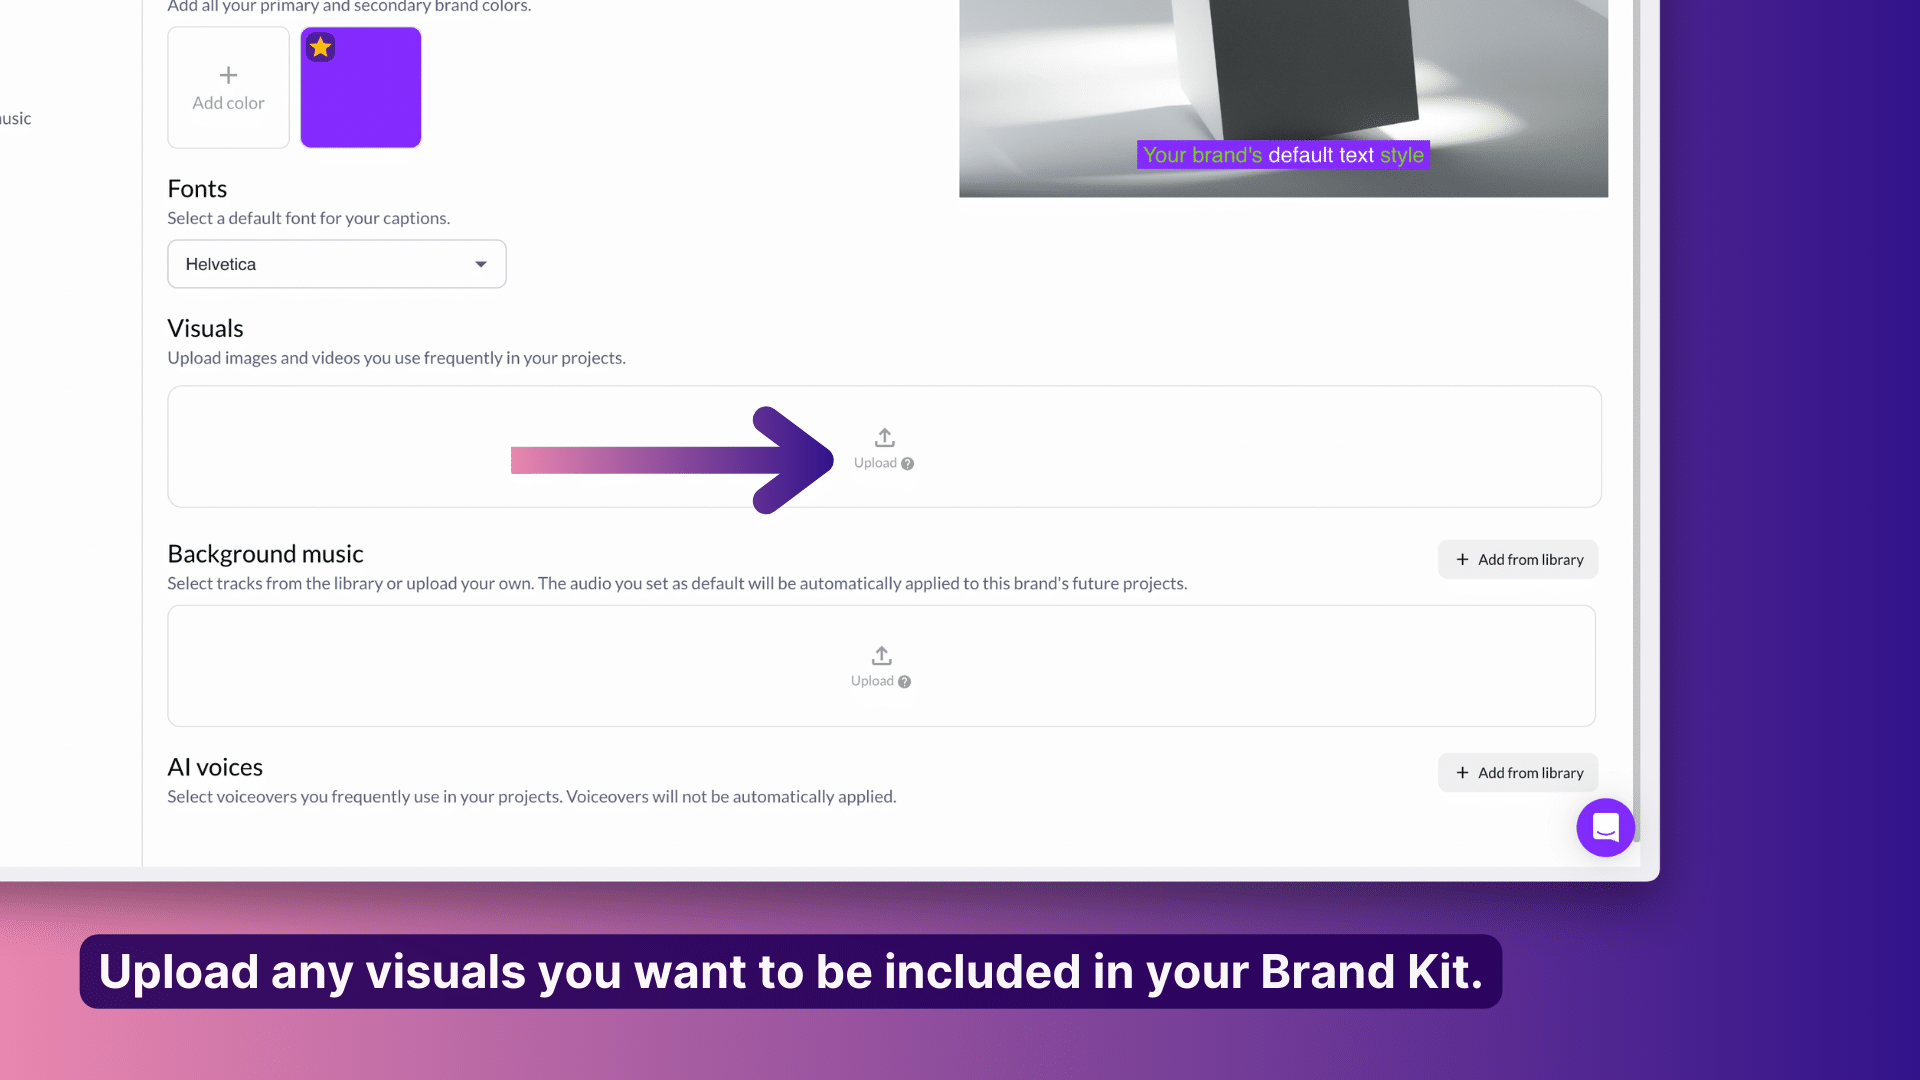  Brand Kit (logo, fonts, colors, music, and even pre-selected voiceover).